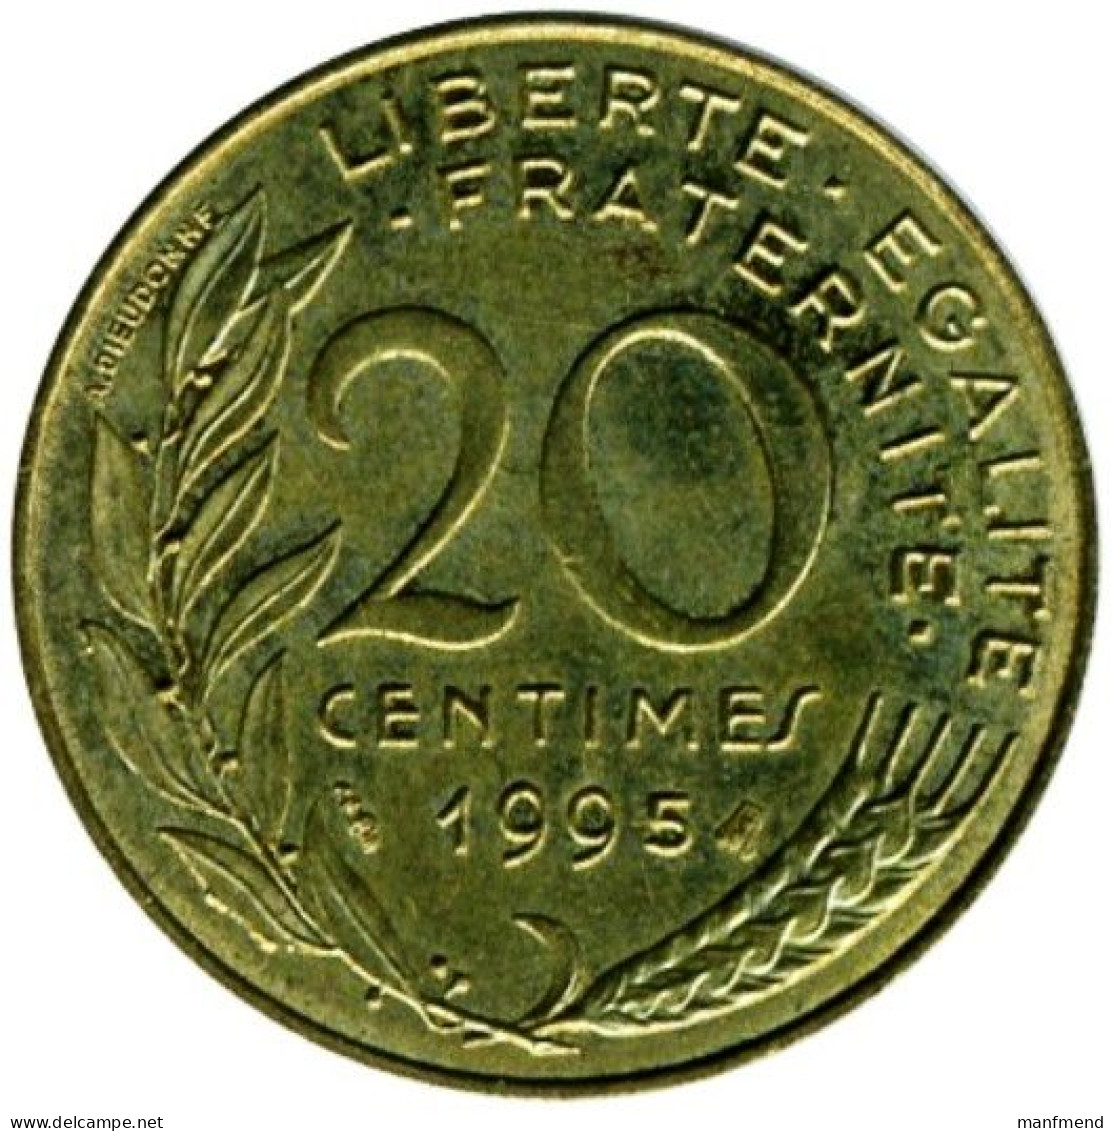 France - 1995 - KM 930 - 20 Centimes - XF - 20 Centimes